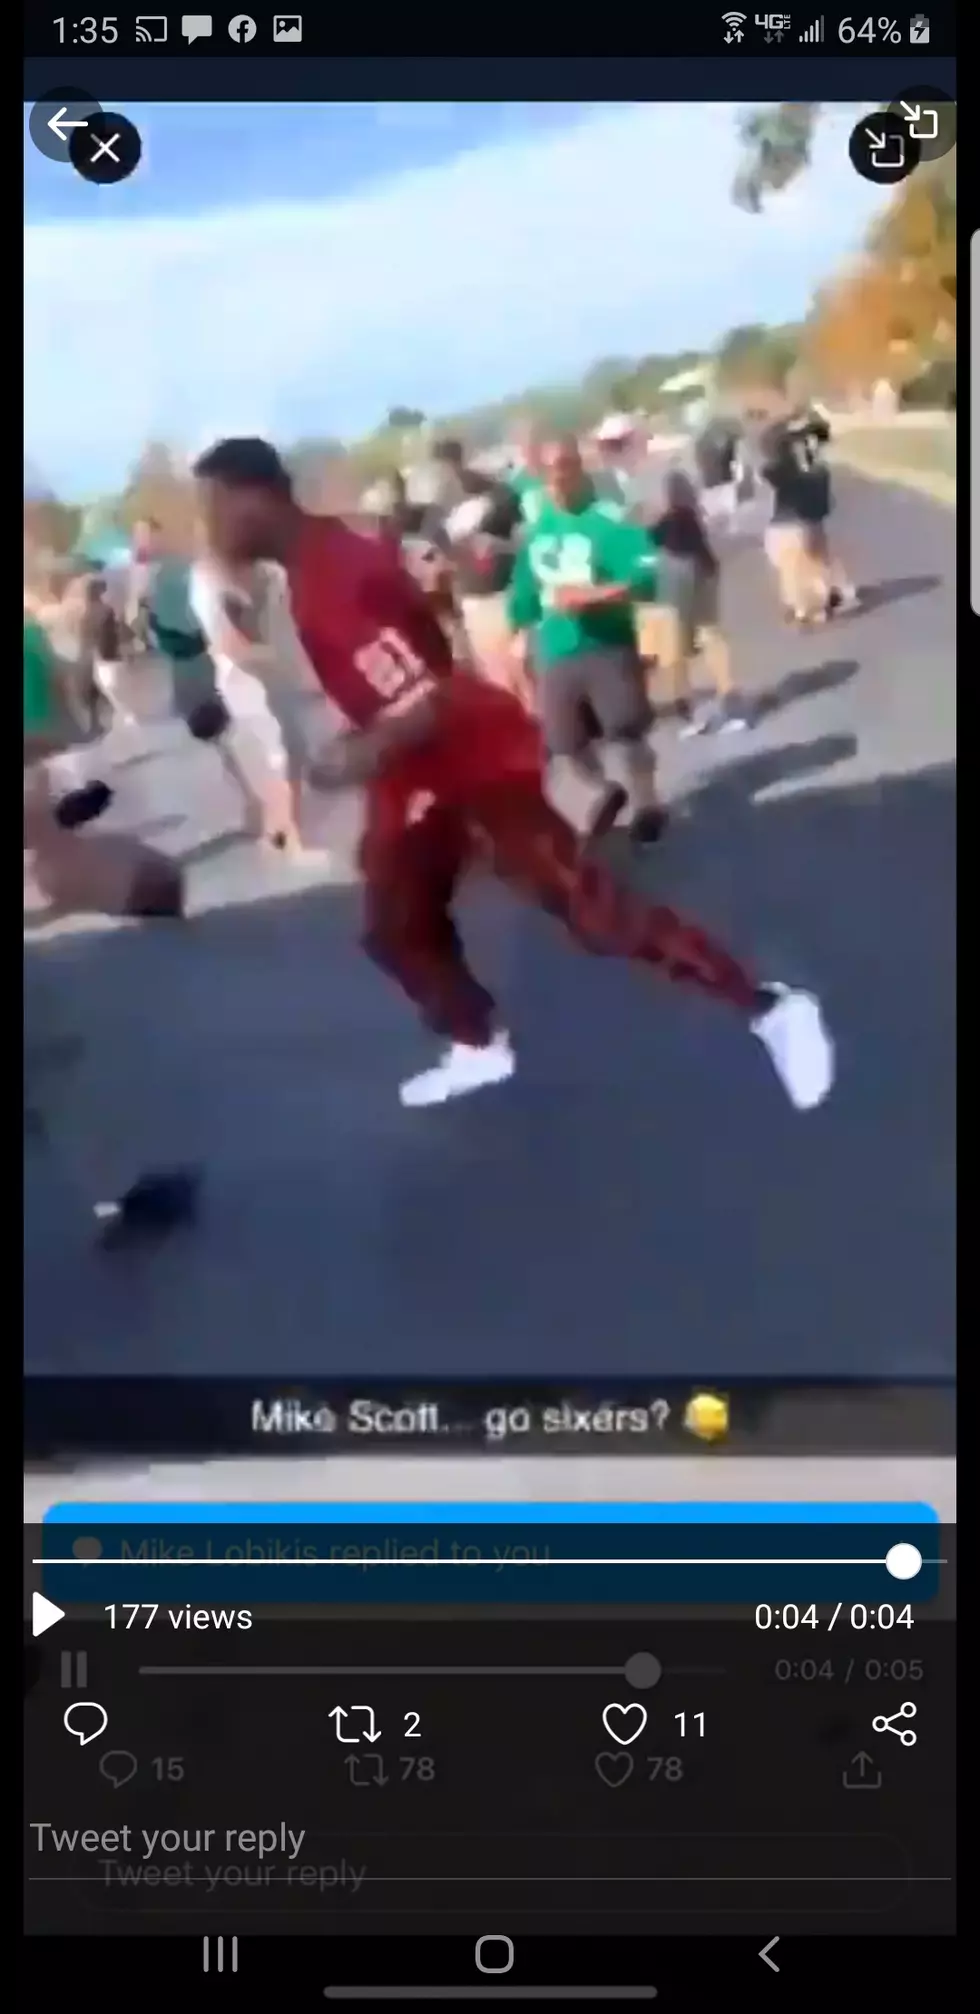 Mike Scott Gets into an Altercation at Eagles Tailgate